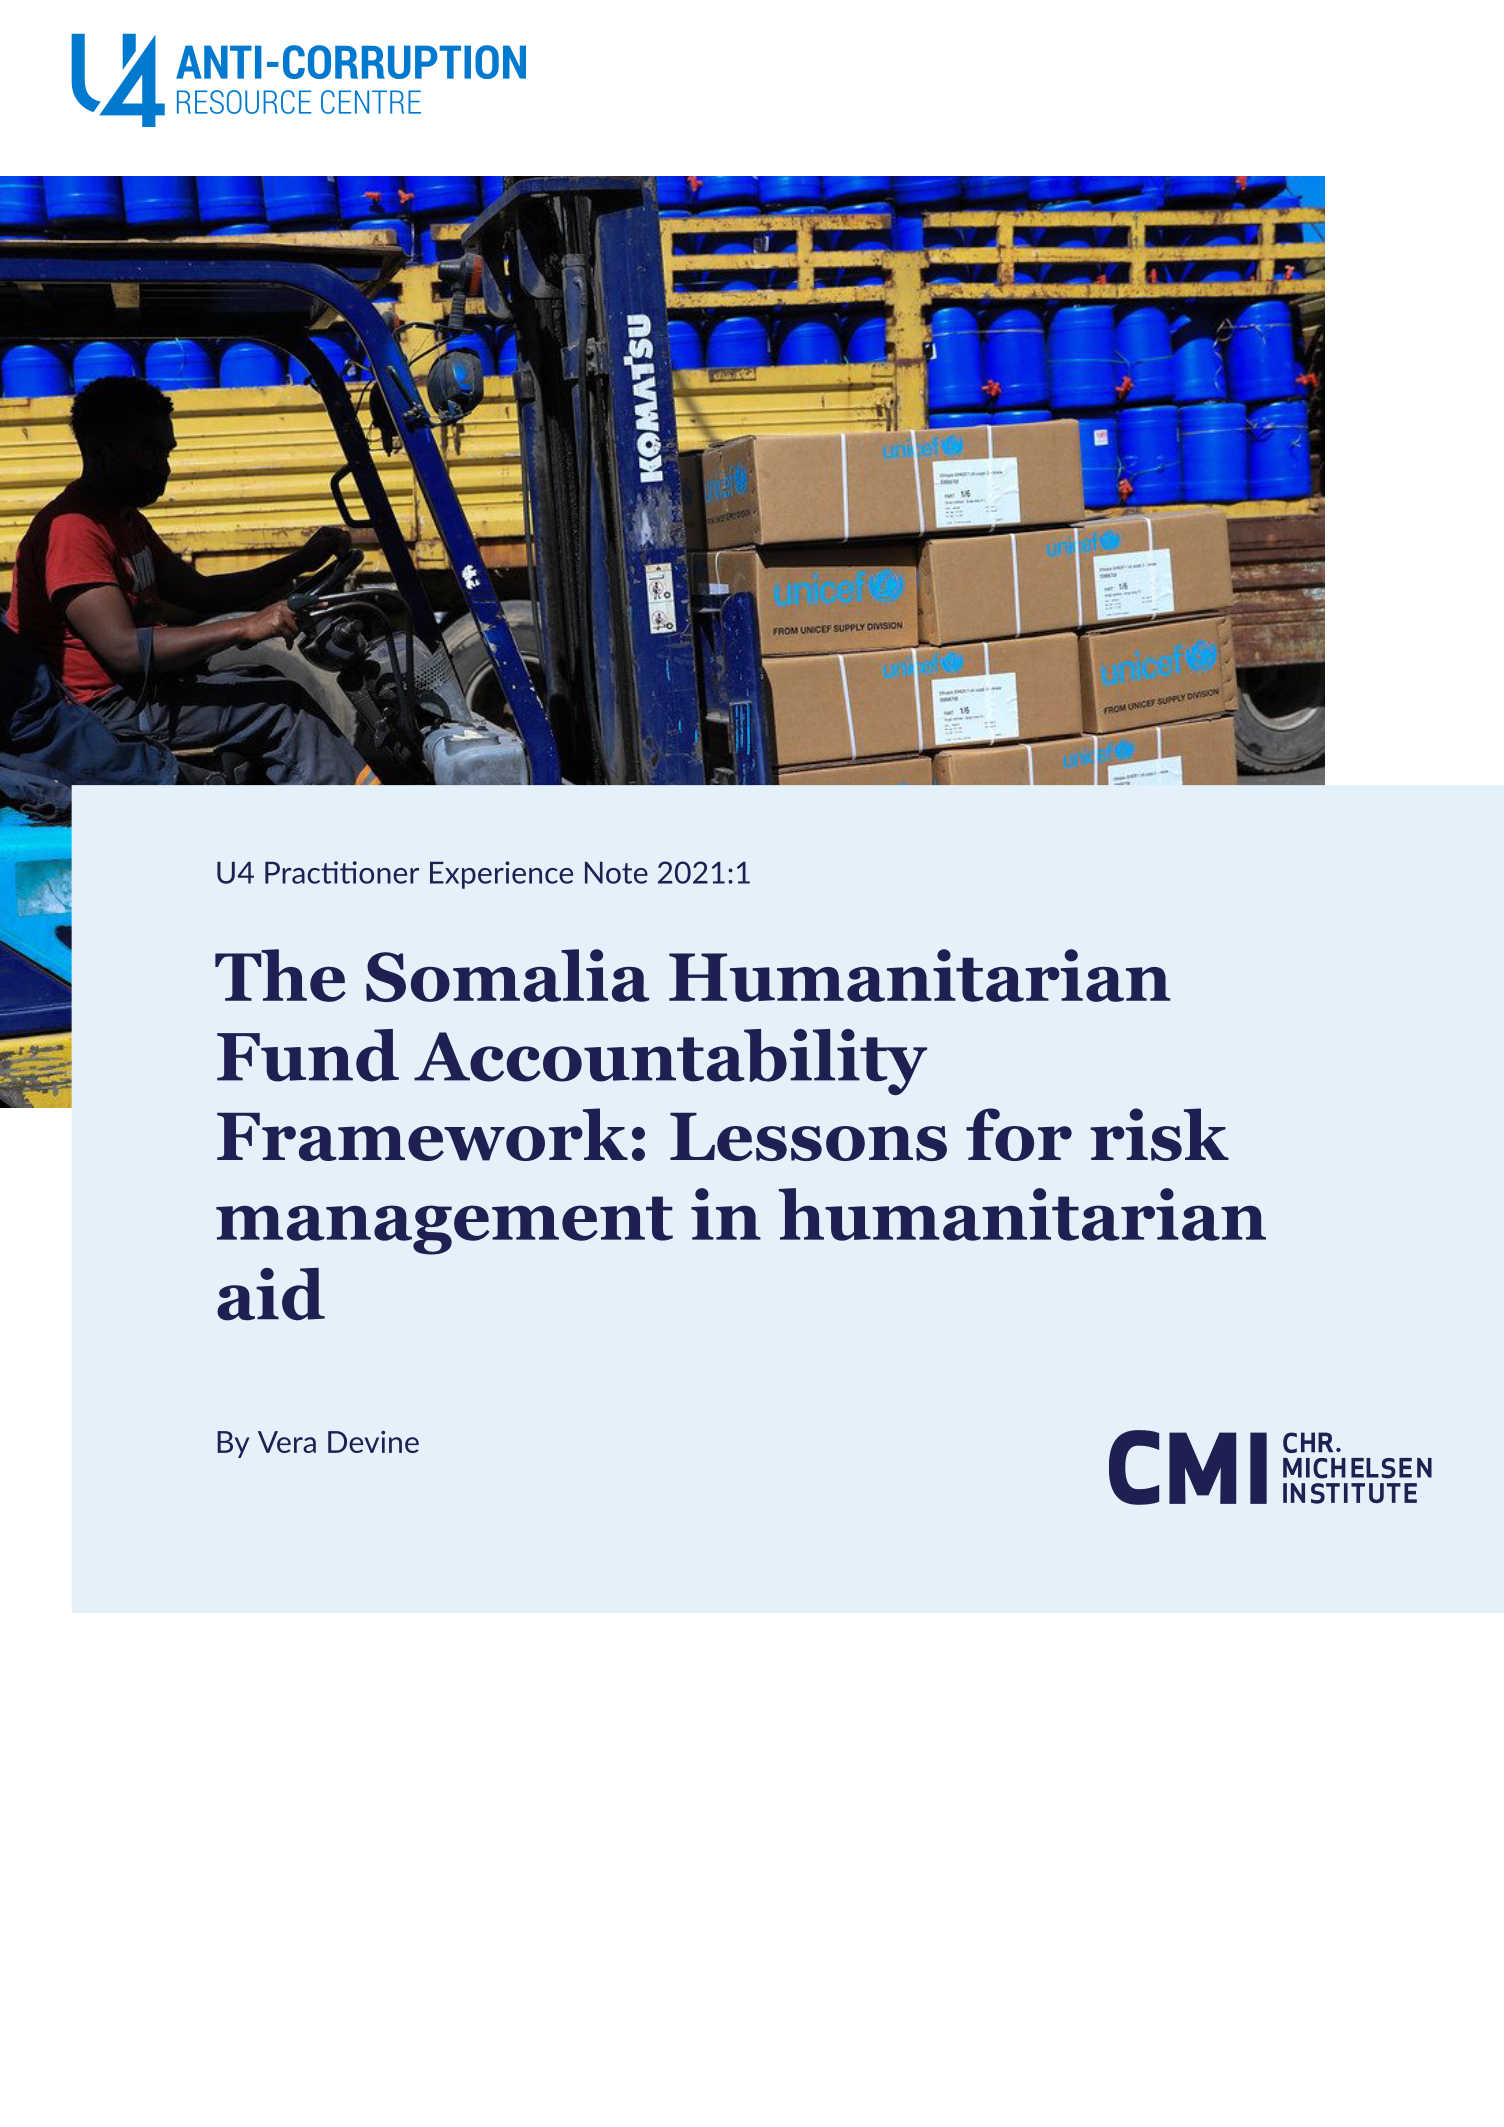 The Somalia Humanitarian Fund Accountability Framework: Lessons for risk management in humanitarian aid